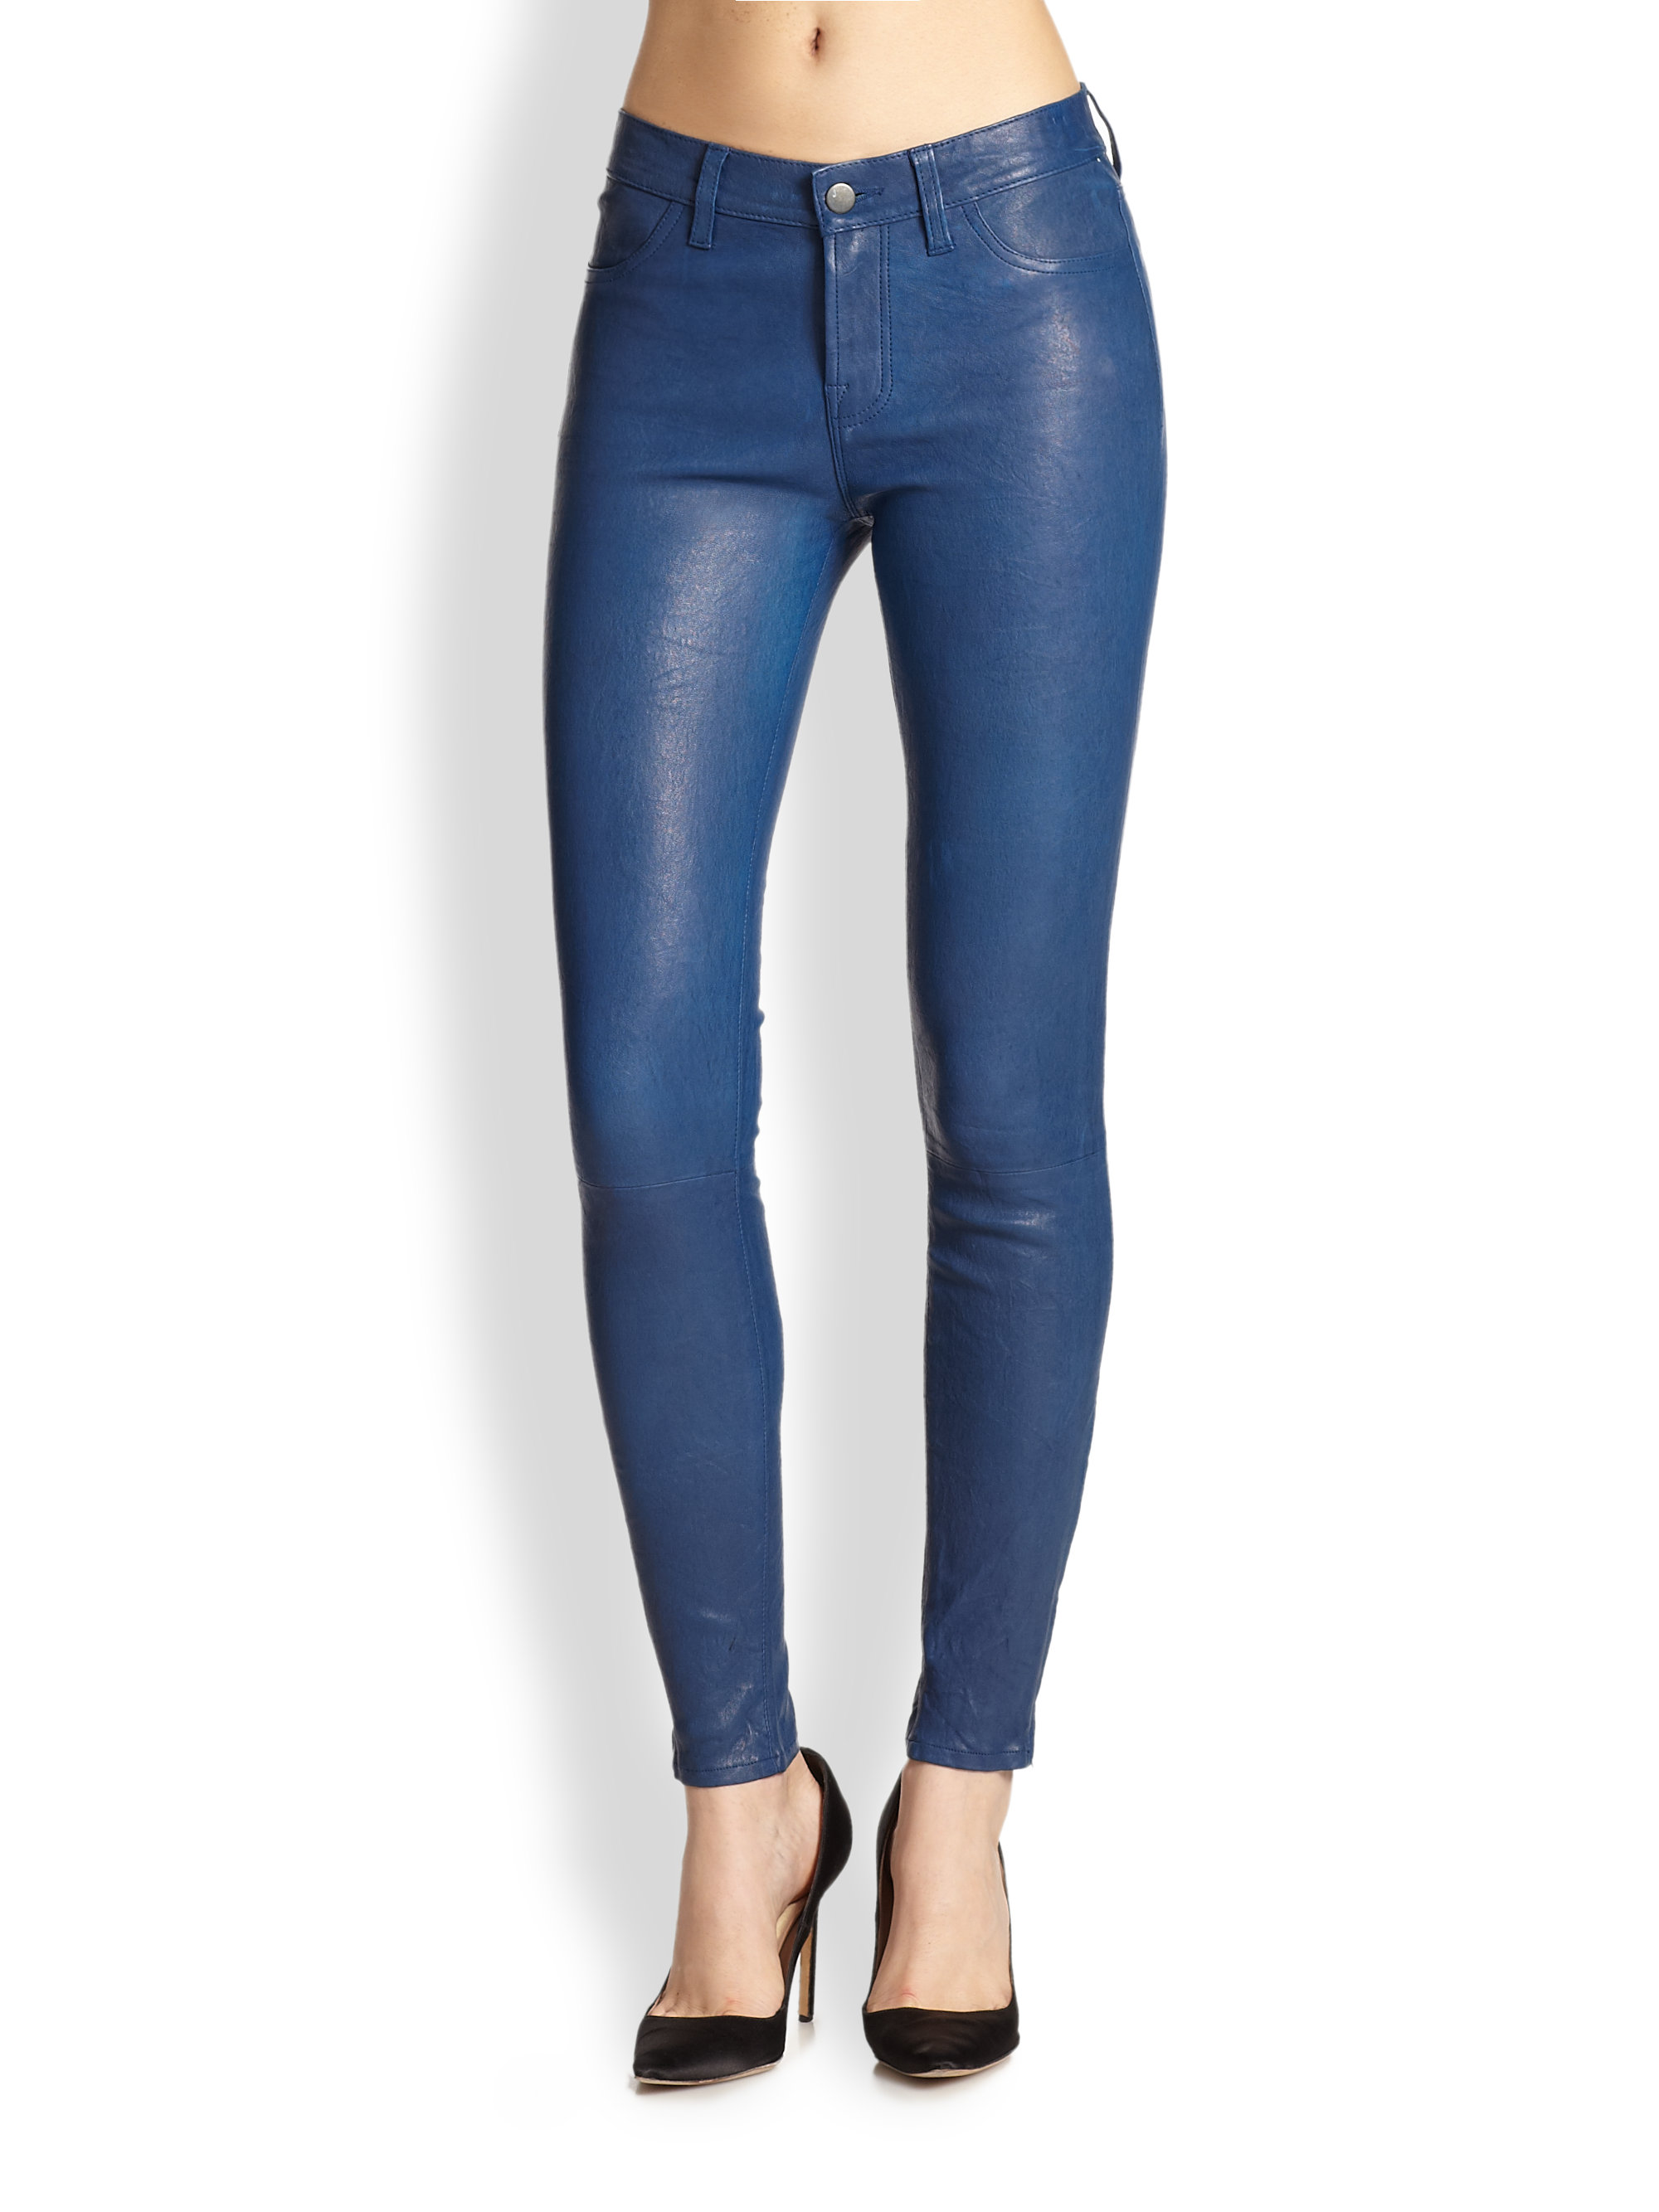 Lyst - J brand Leather Skinny Pants in Blue